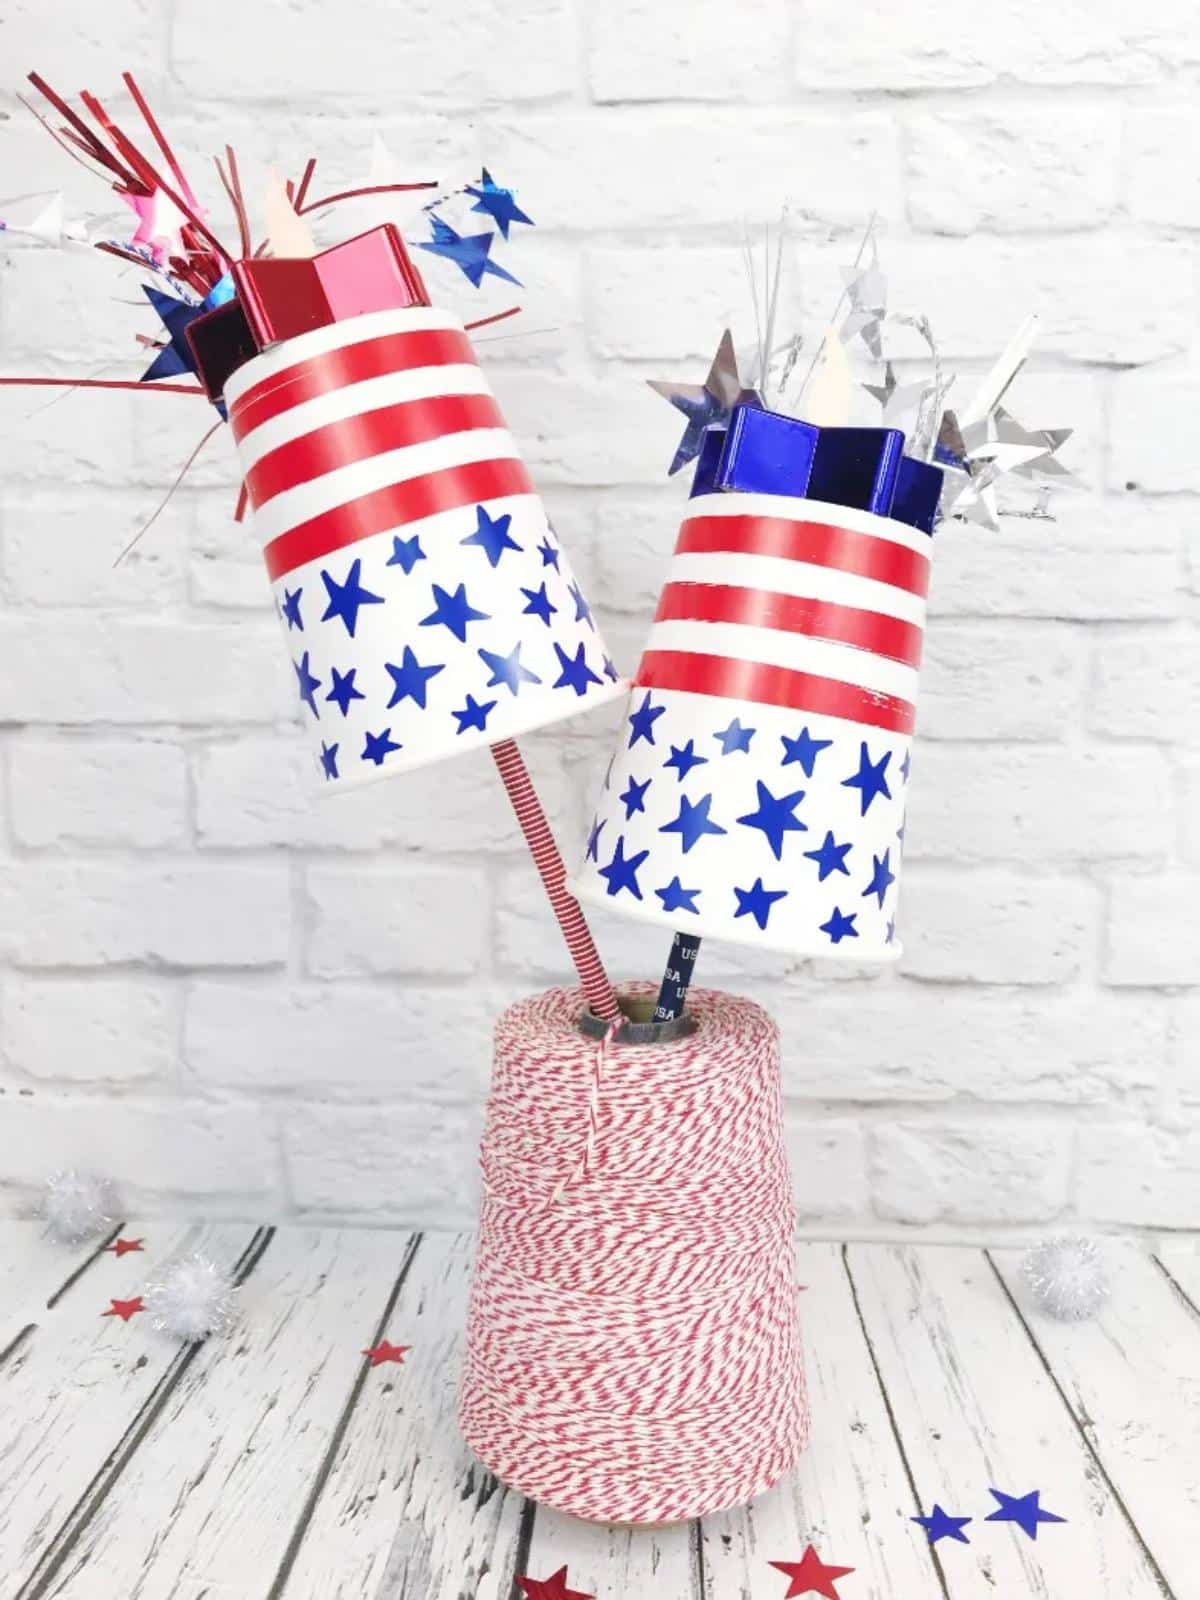 Patriotic Flameless Torches